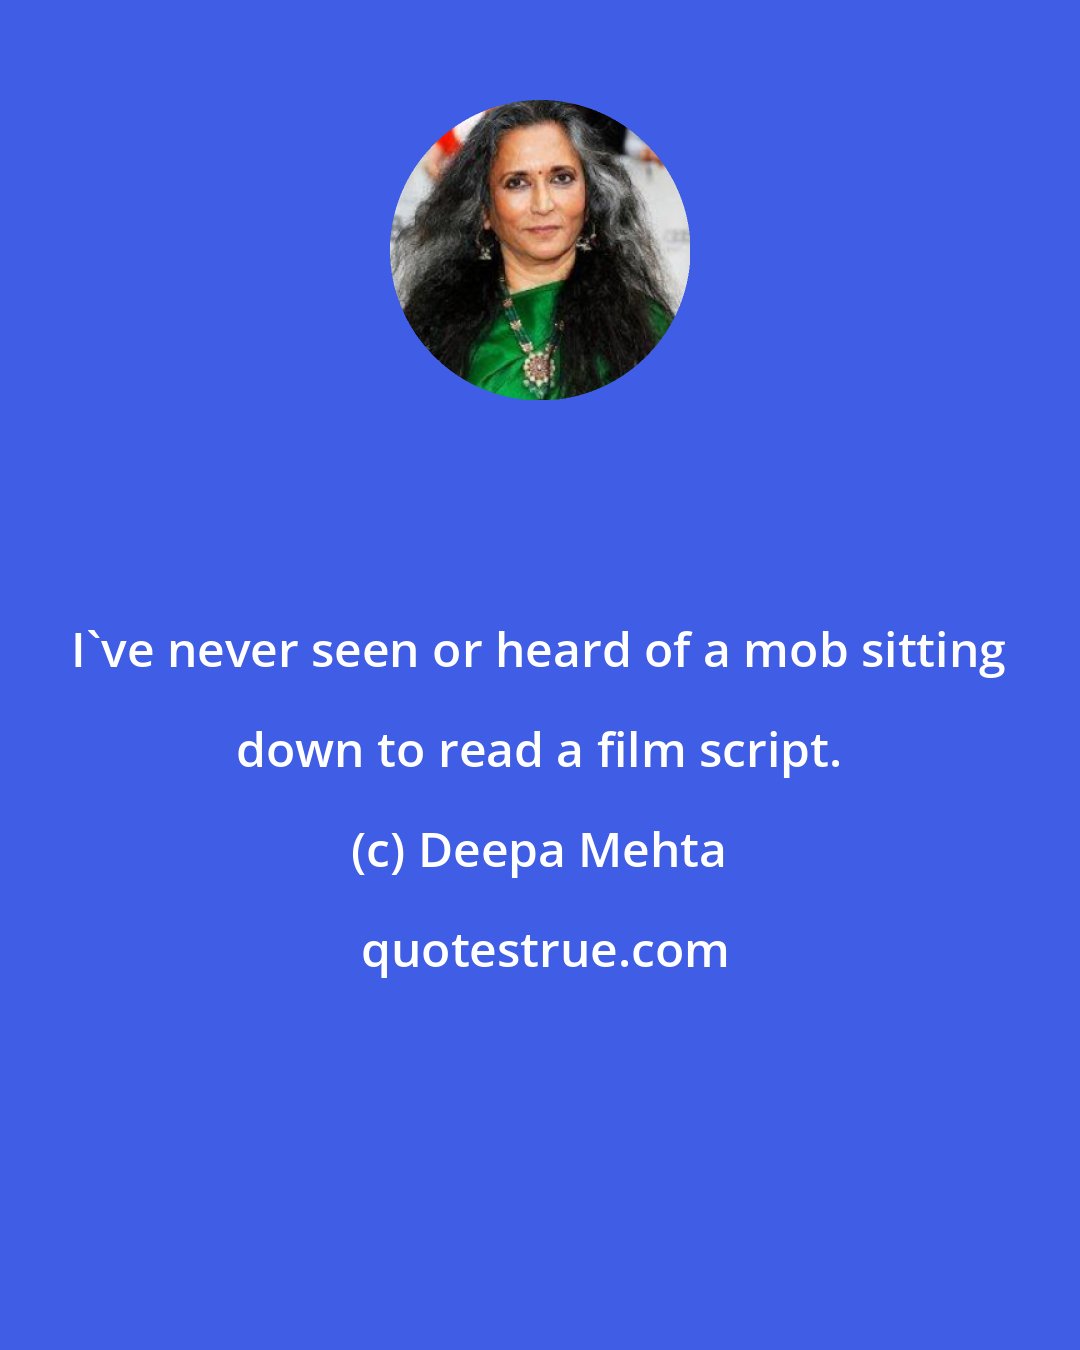 Deepa Mehta: I've never seen or heard of a mob sitting down to read a film script.